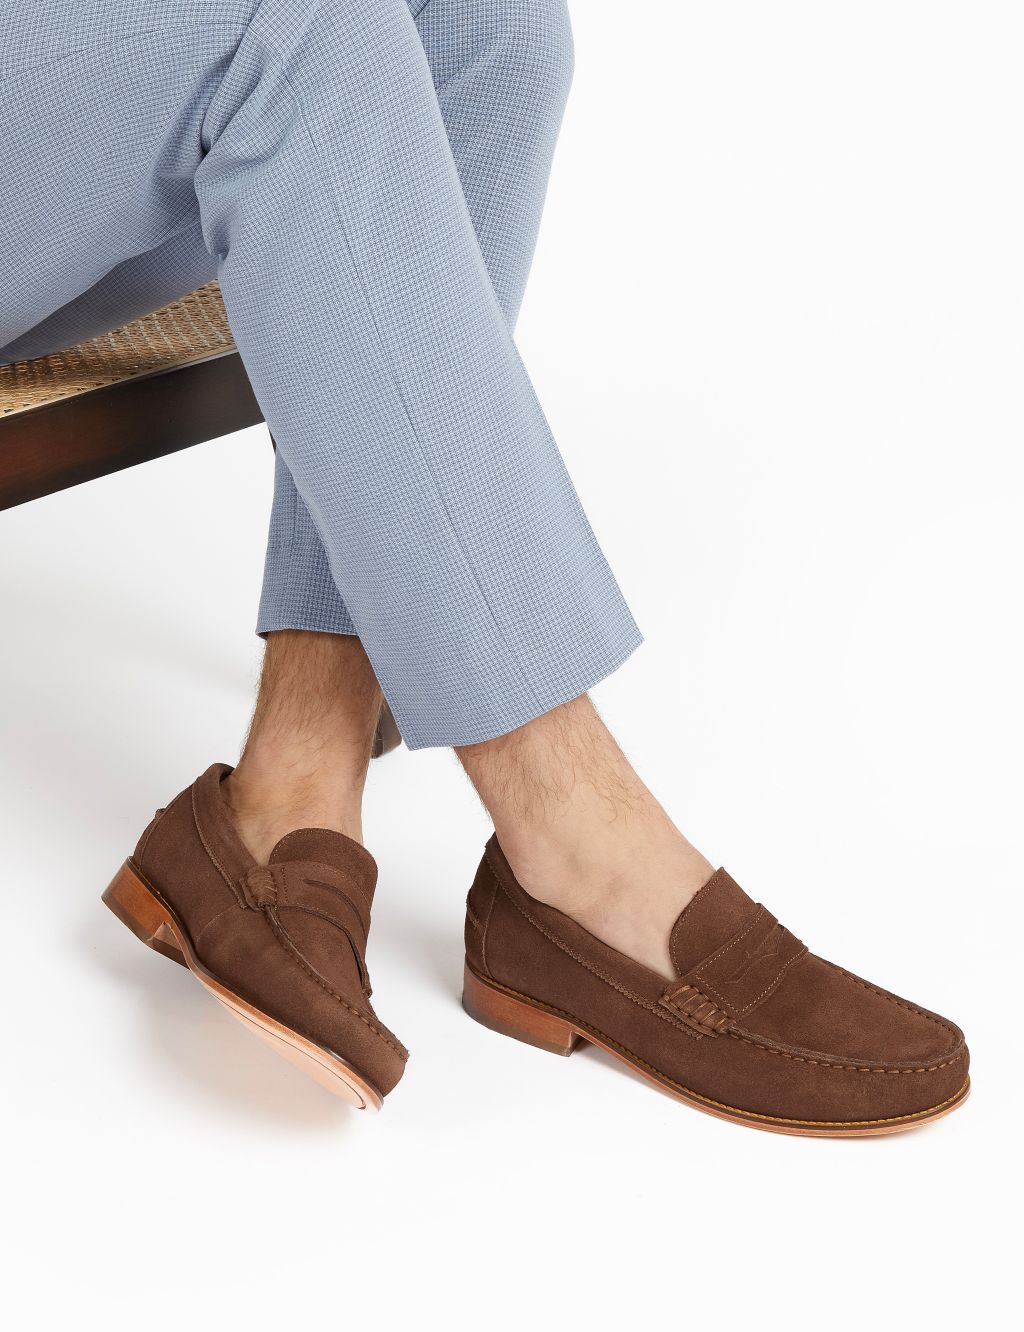 Leather Slip-On Loafers image 1